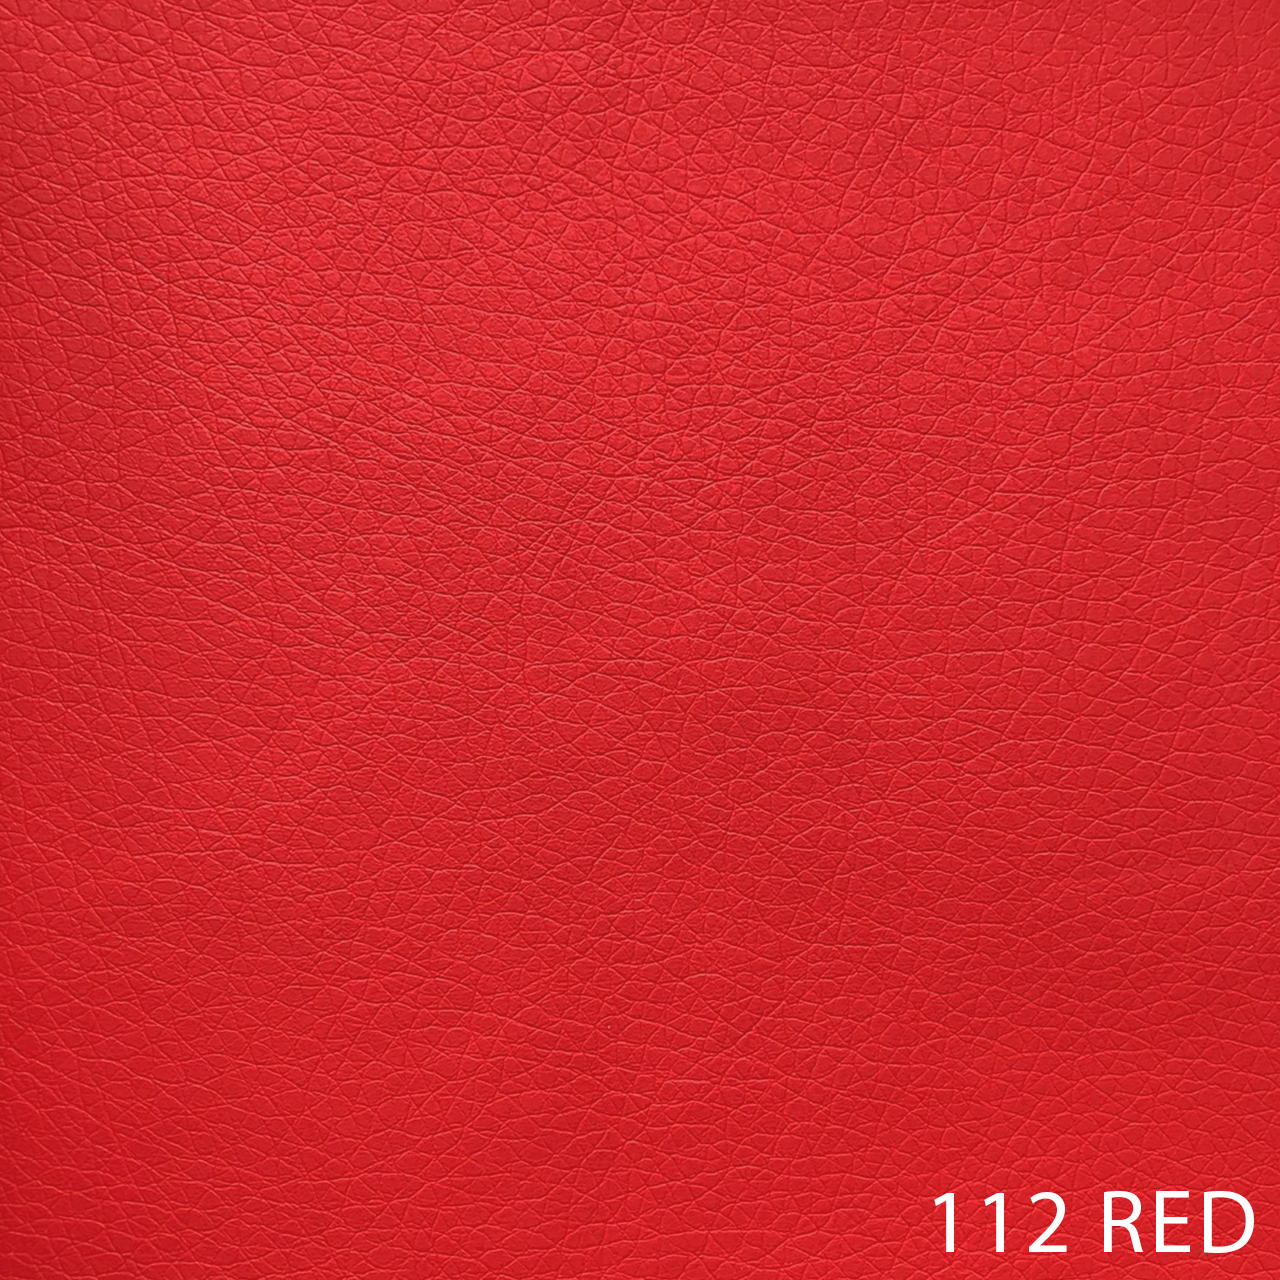 112 RED